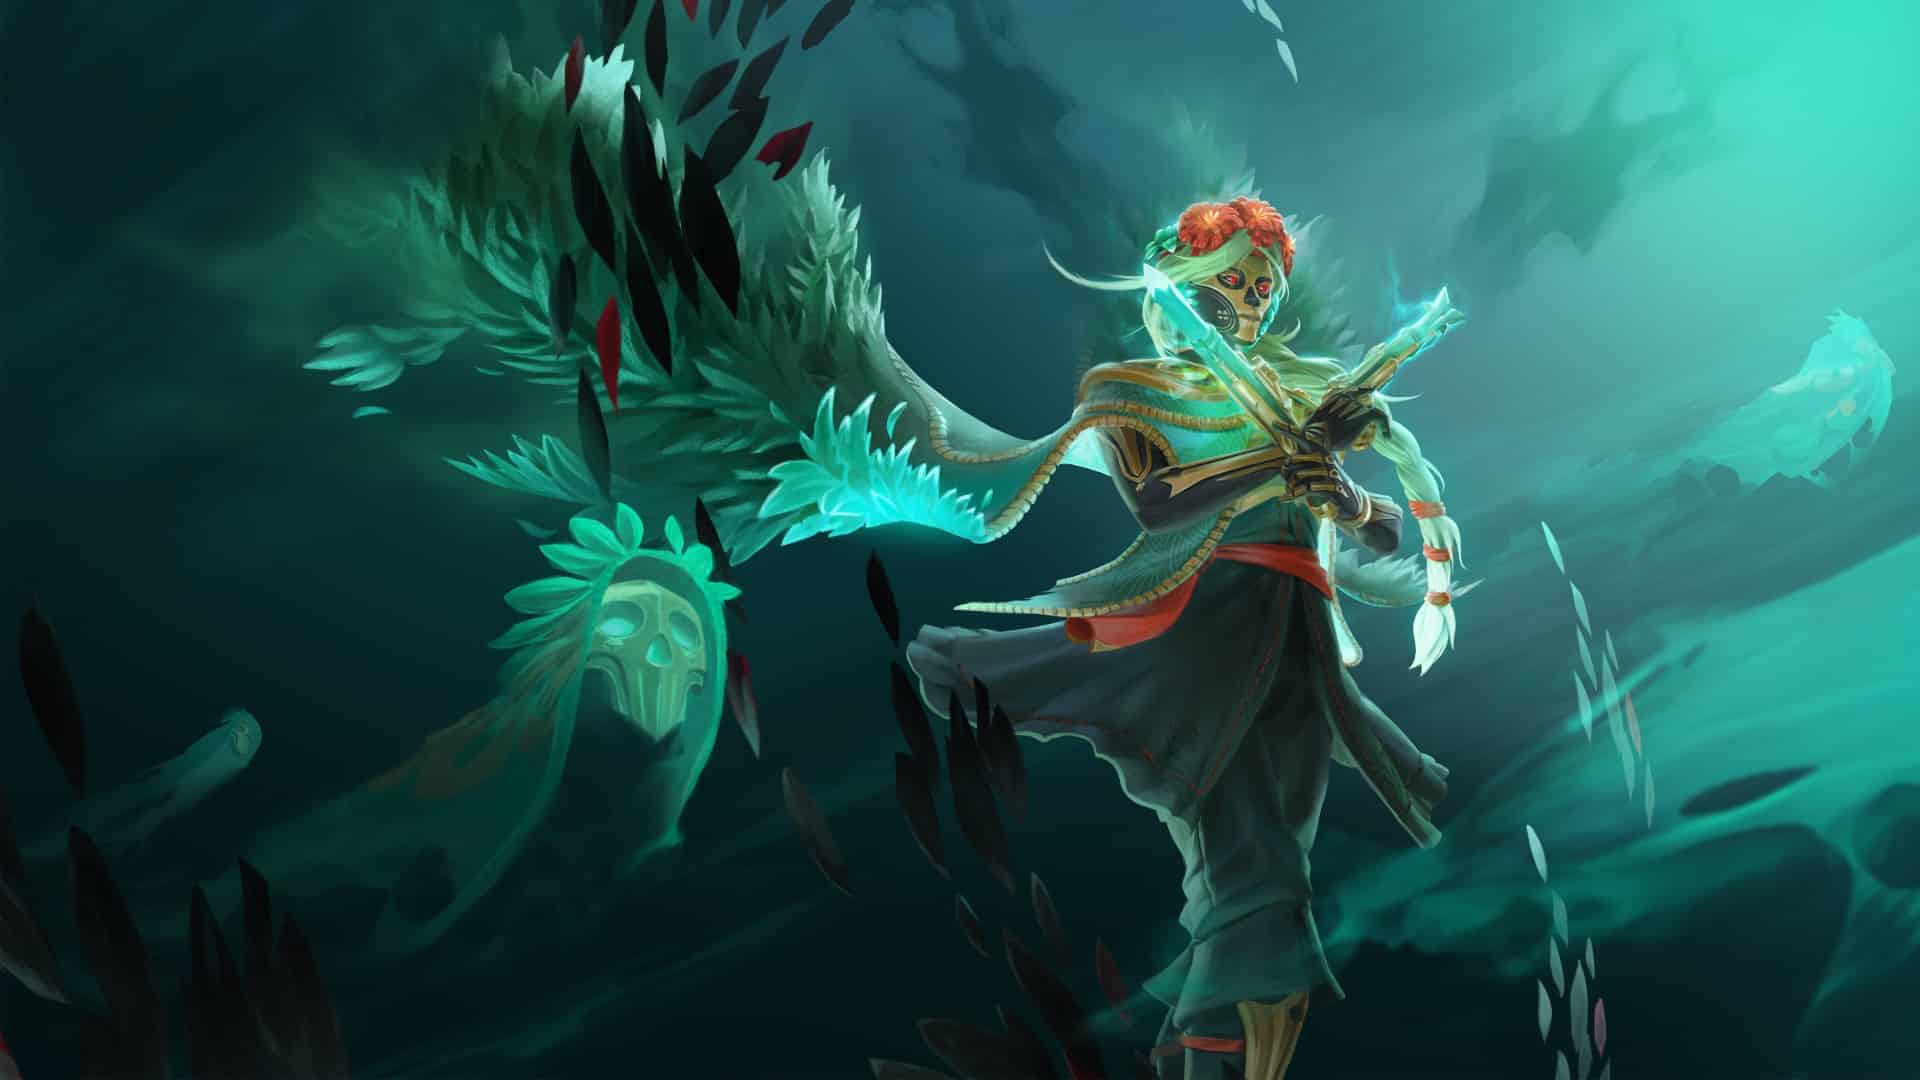 Dota 2 Patch 7.34c Overview – How It Changes the Meta?